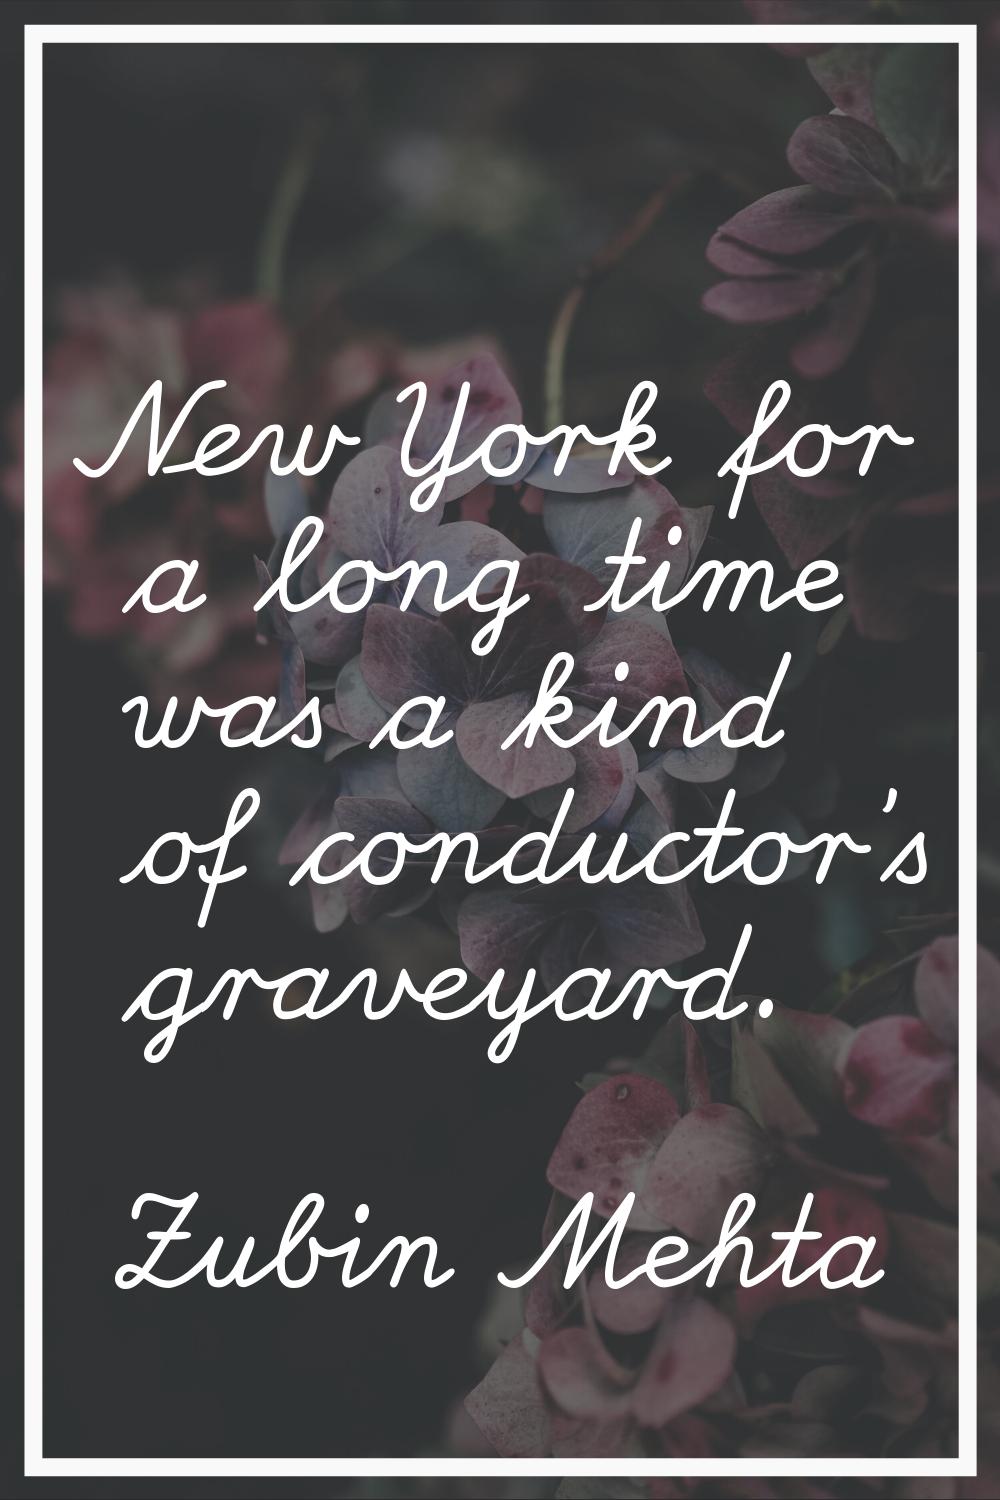 New York for a long time was a kind of conductor's graveyard.